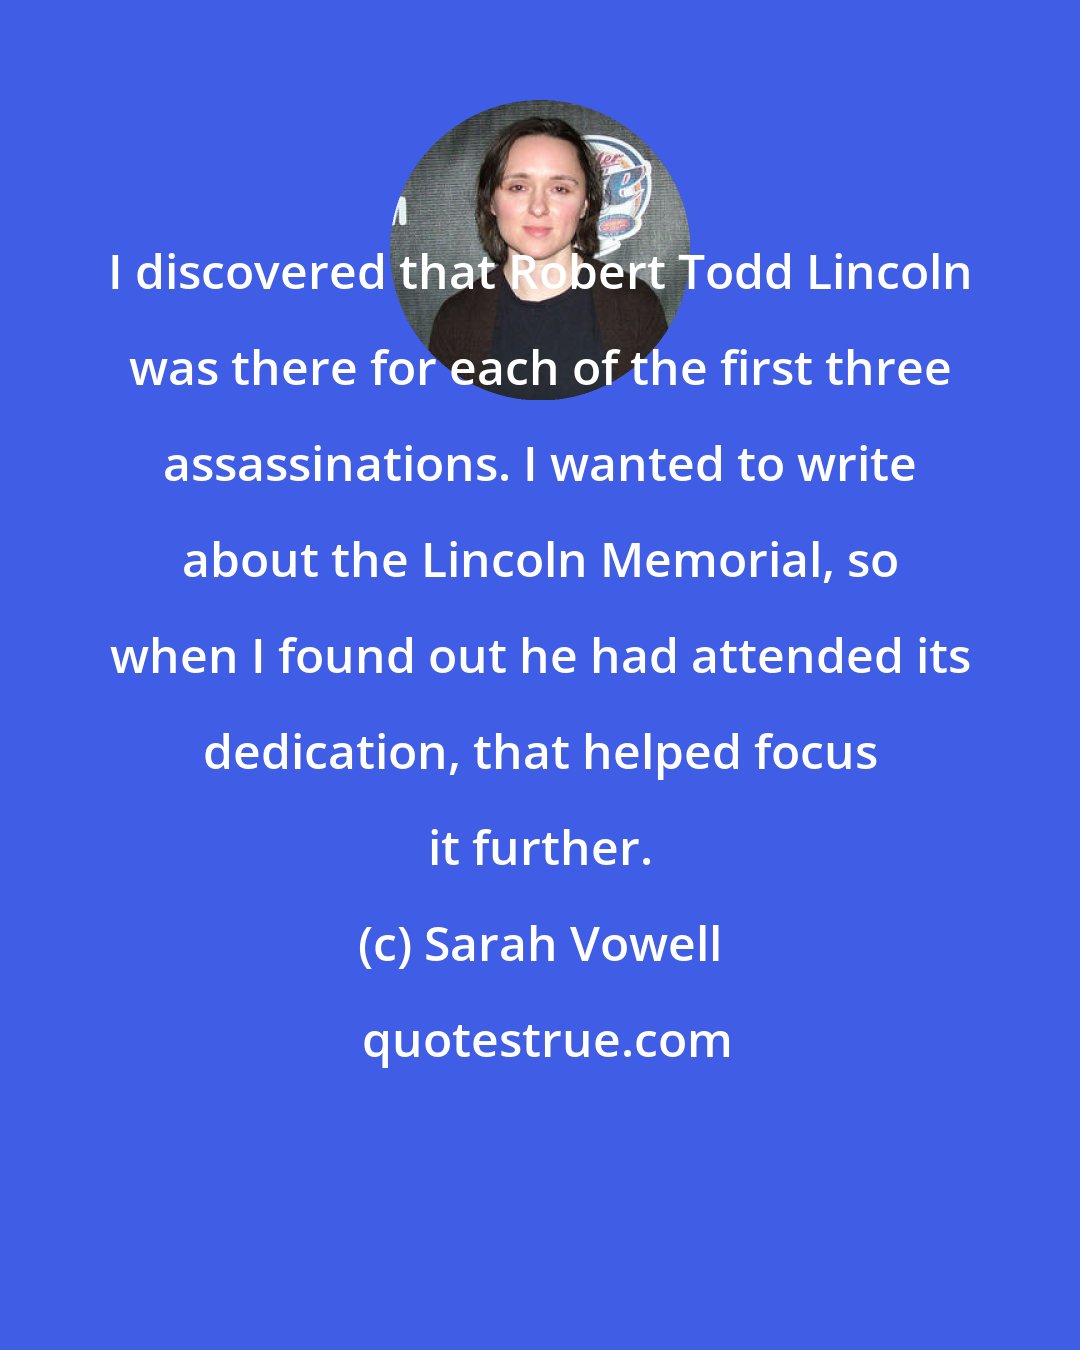 Sarah Vowell: I discovered that Robert Todd Lincoln was there for each of the first three assassinations. I wanted to write about the Lincoln Memorial, so when I found out he had attended its dedication, that helped focus it further.